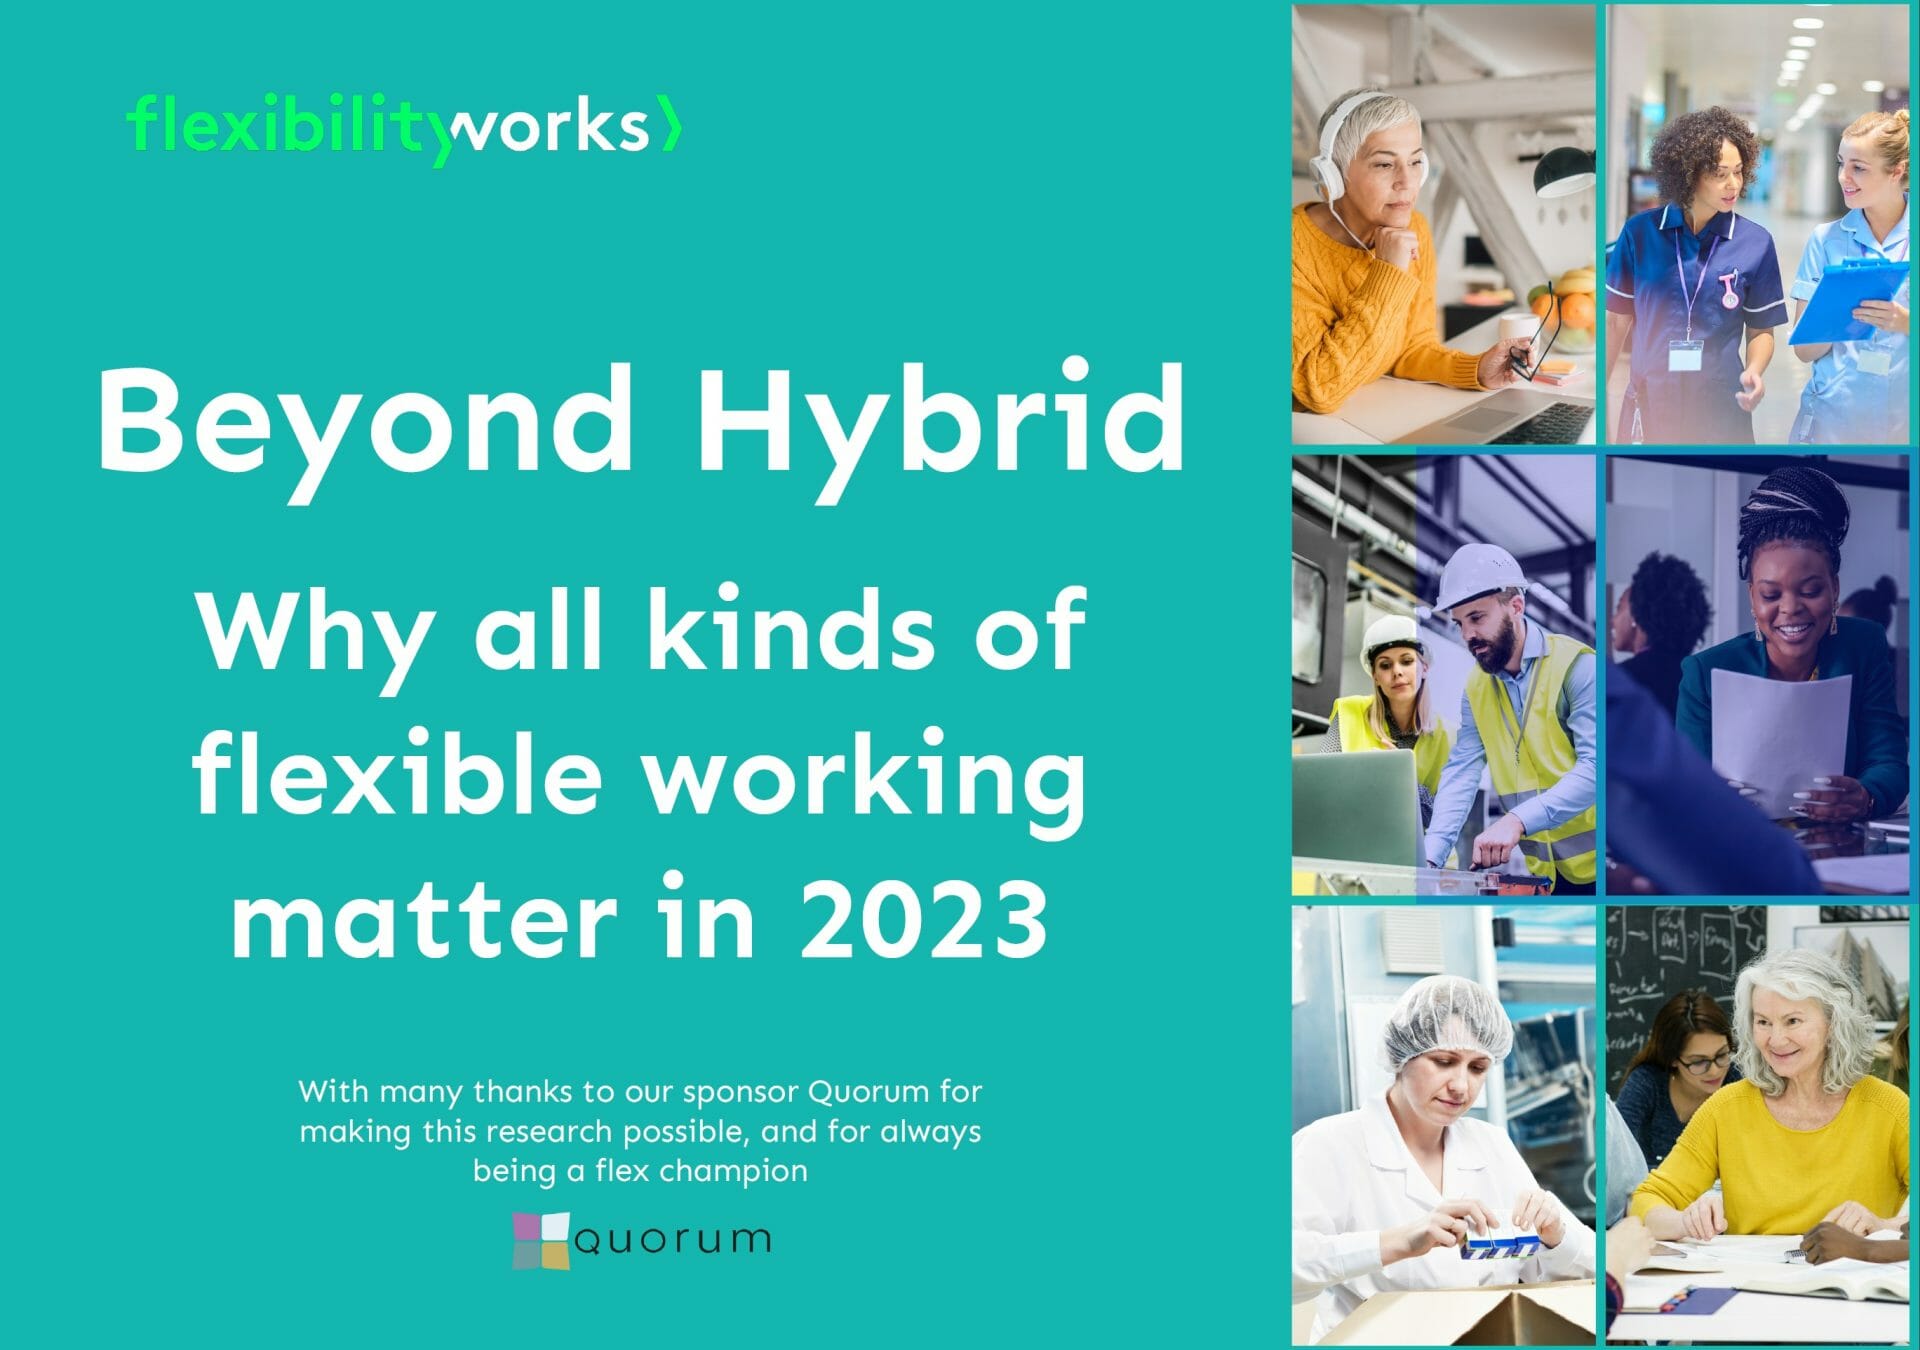 Beyond Hybrid – Why all kinds of flexible working matter in 2023